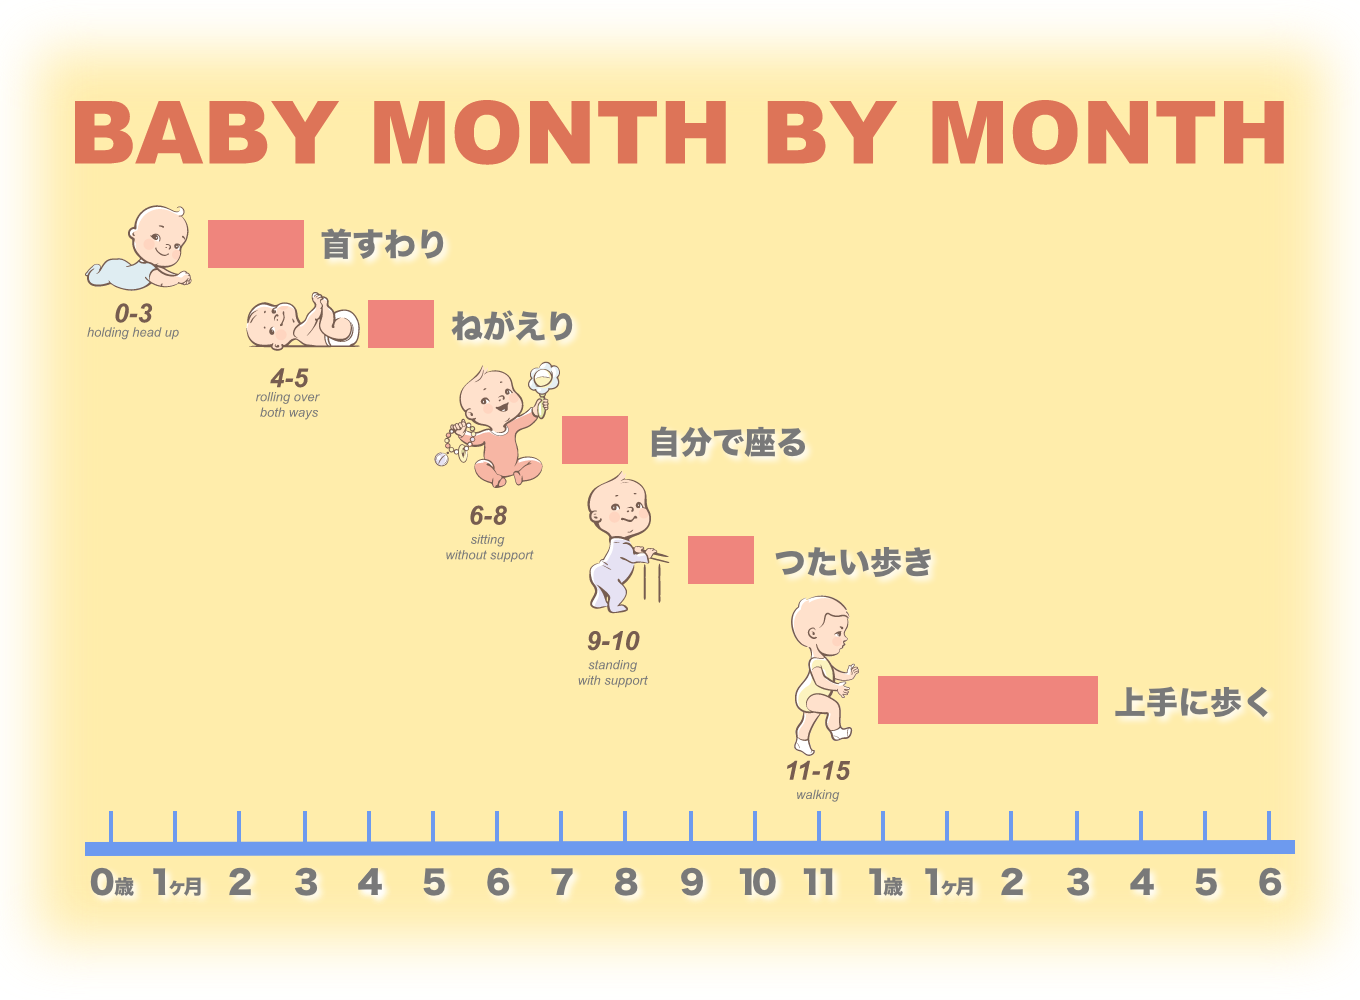 BABY MONTH BY MONTH